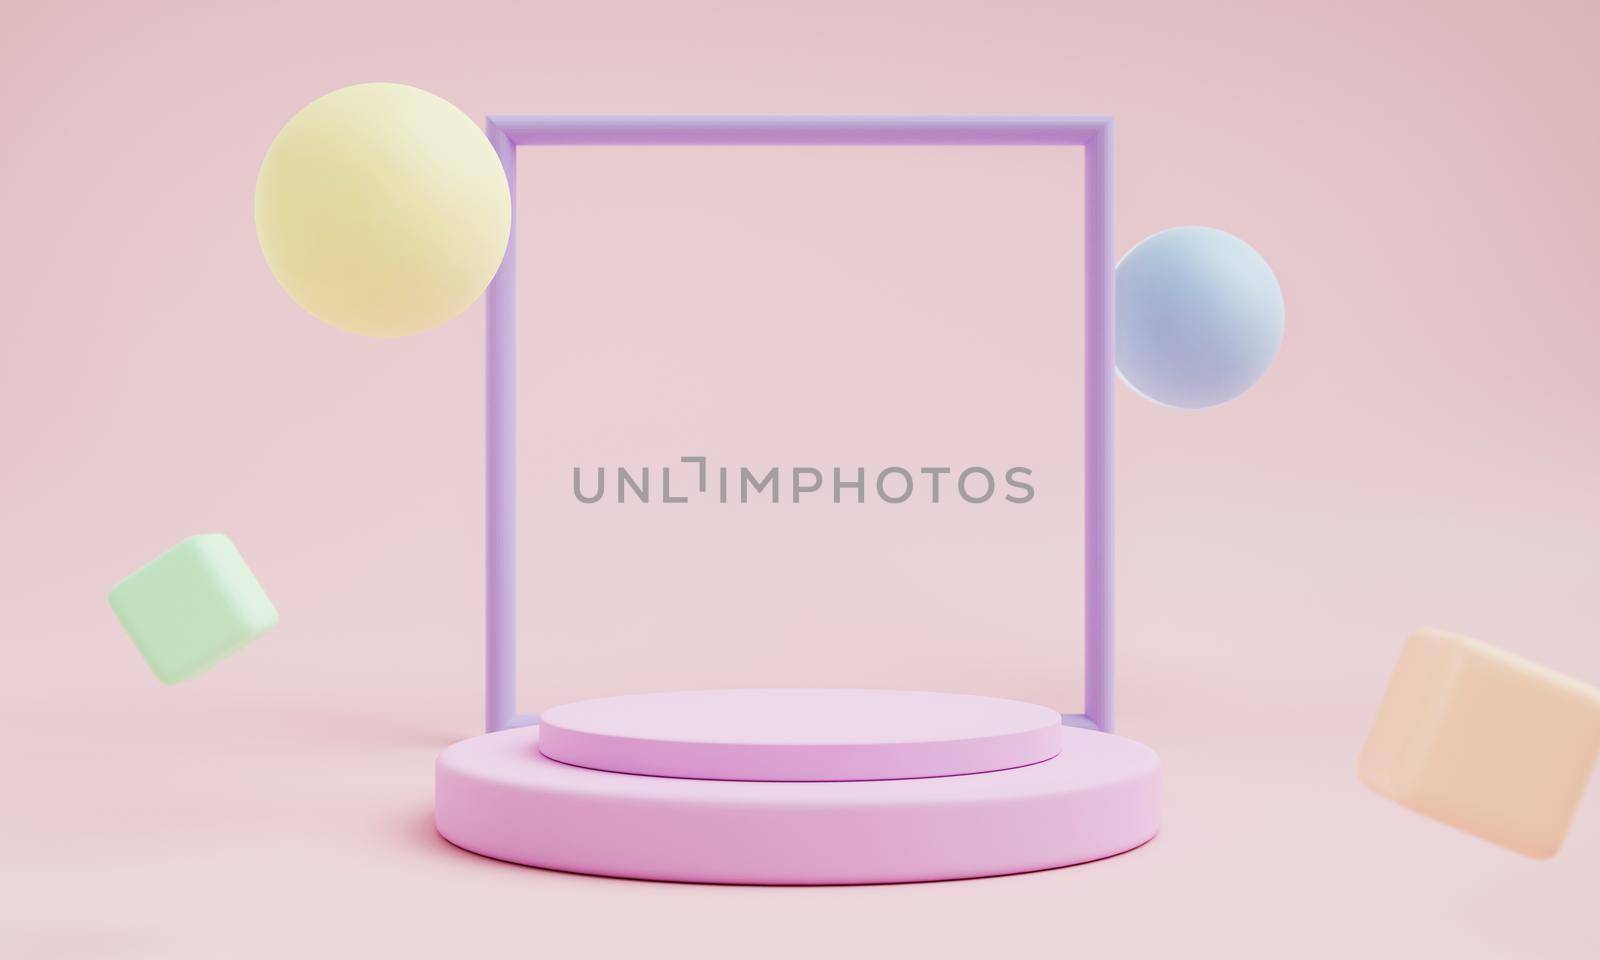 Abstract geometric shape in pastel colors with frame for product podium presentation background. Art and Color concept. 3D illustration rendering by MiniStocker